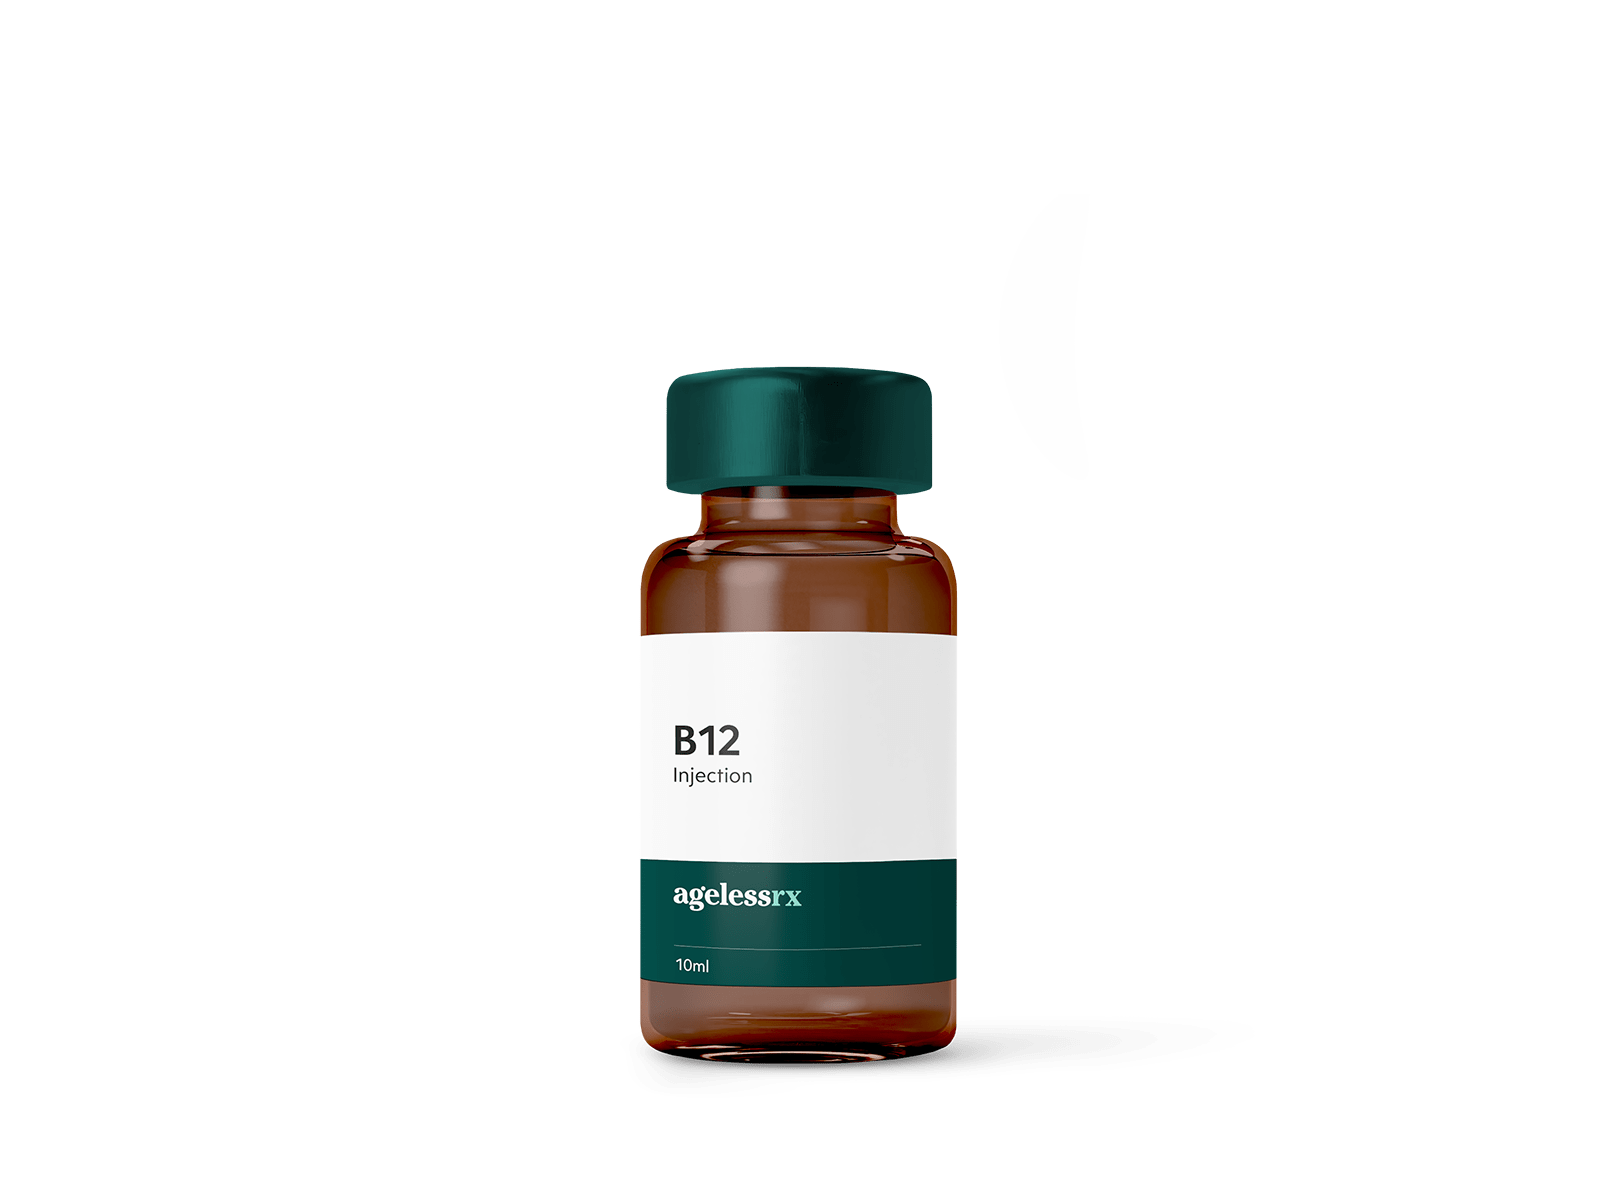 Product image for B12 Injection